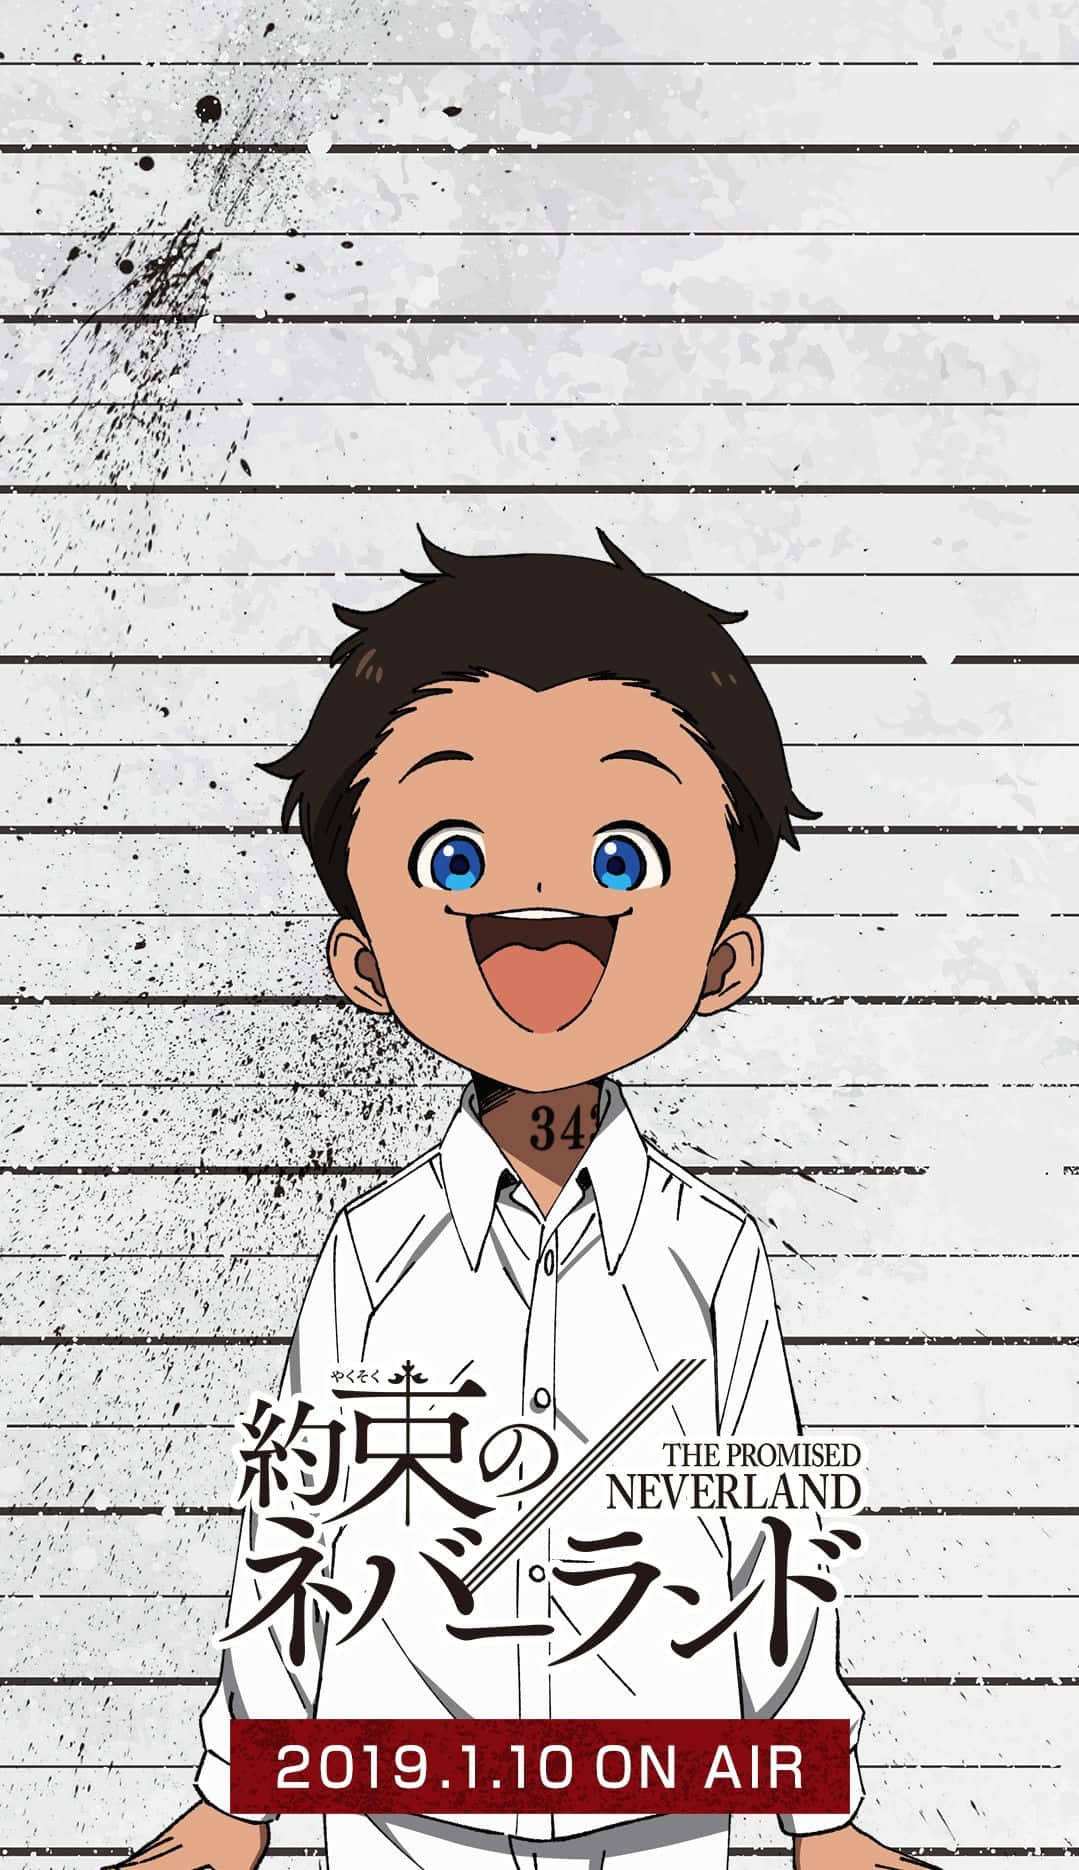 The Promised Neverland - Phil Smiling Wallpaper